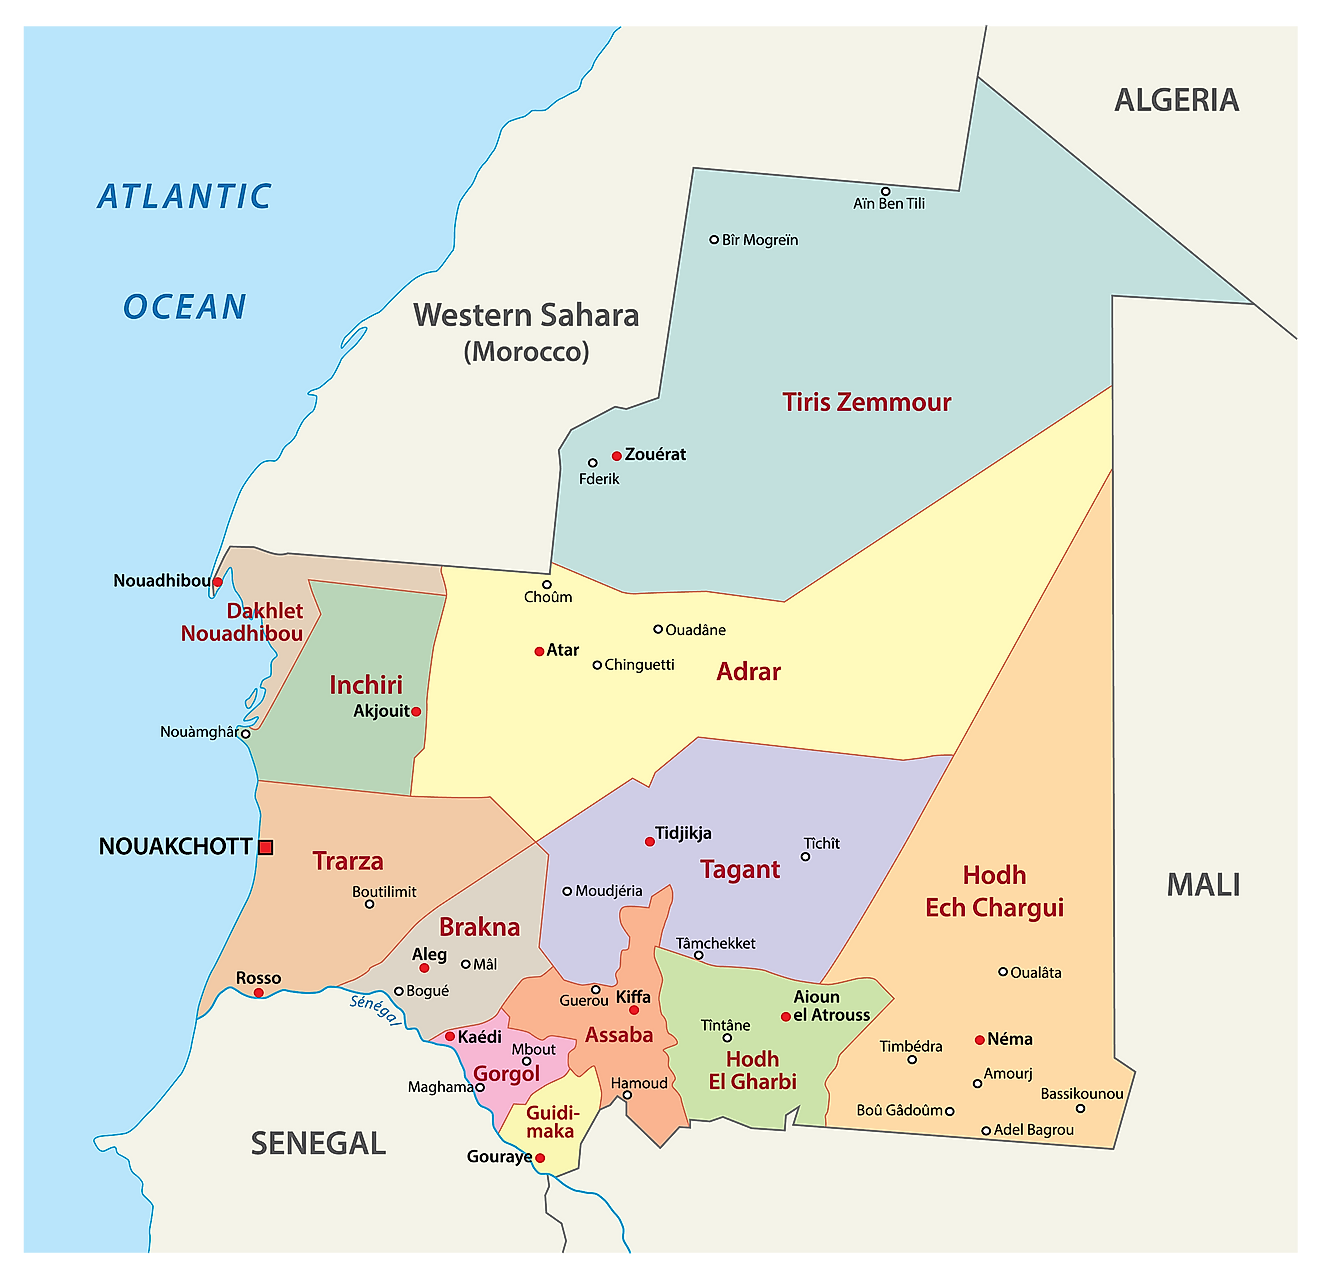 Political map of Mauritania showing the twelve regions, their capitals, and the national capital area, Nouakchott.